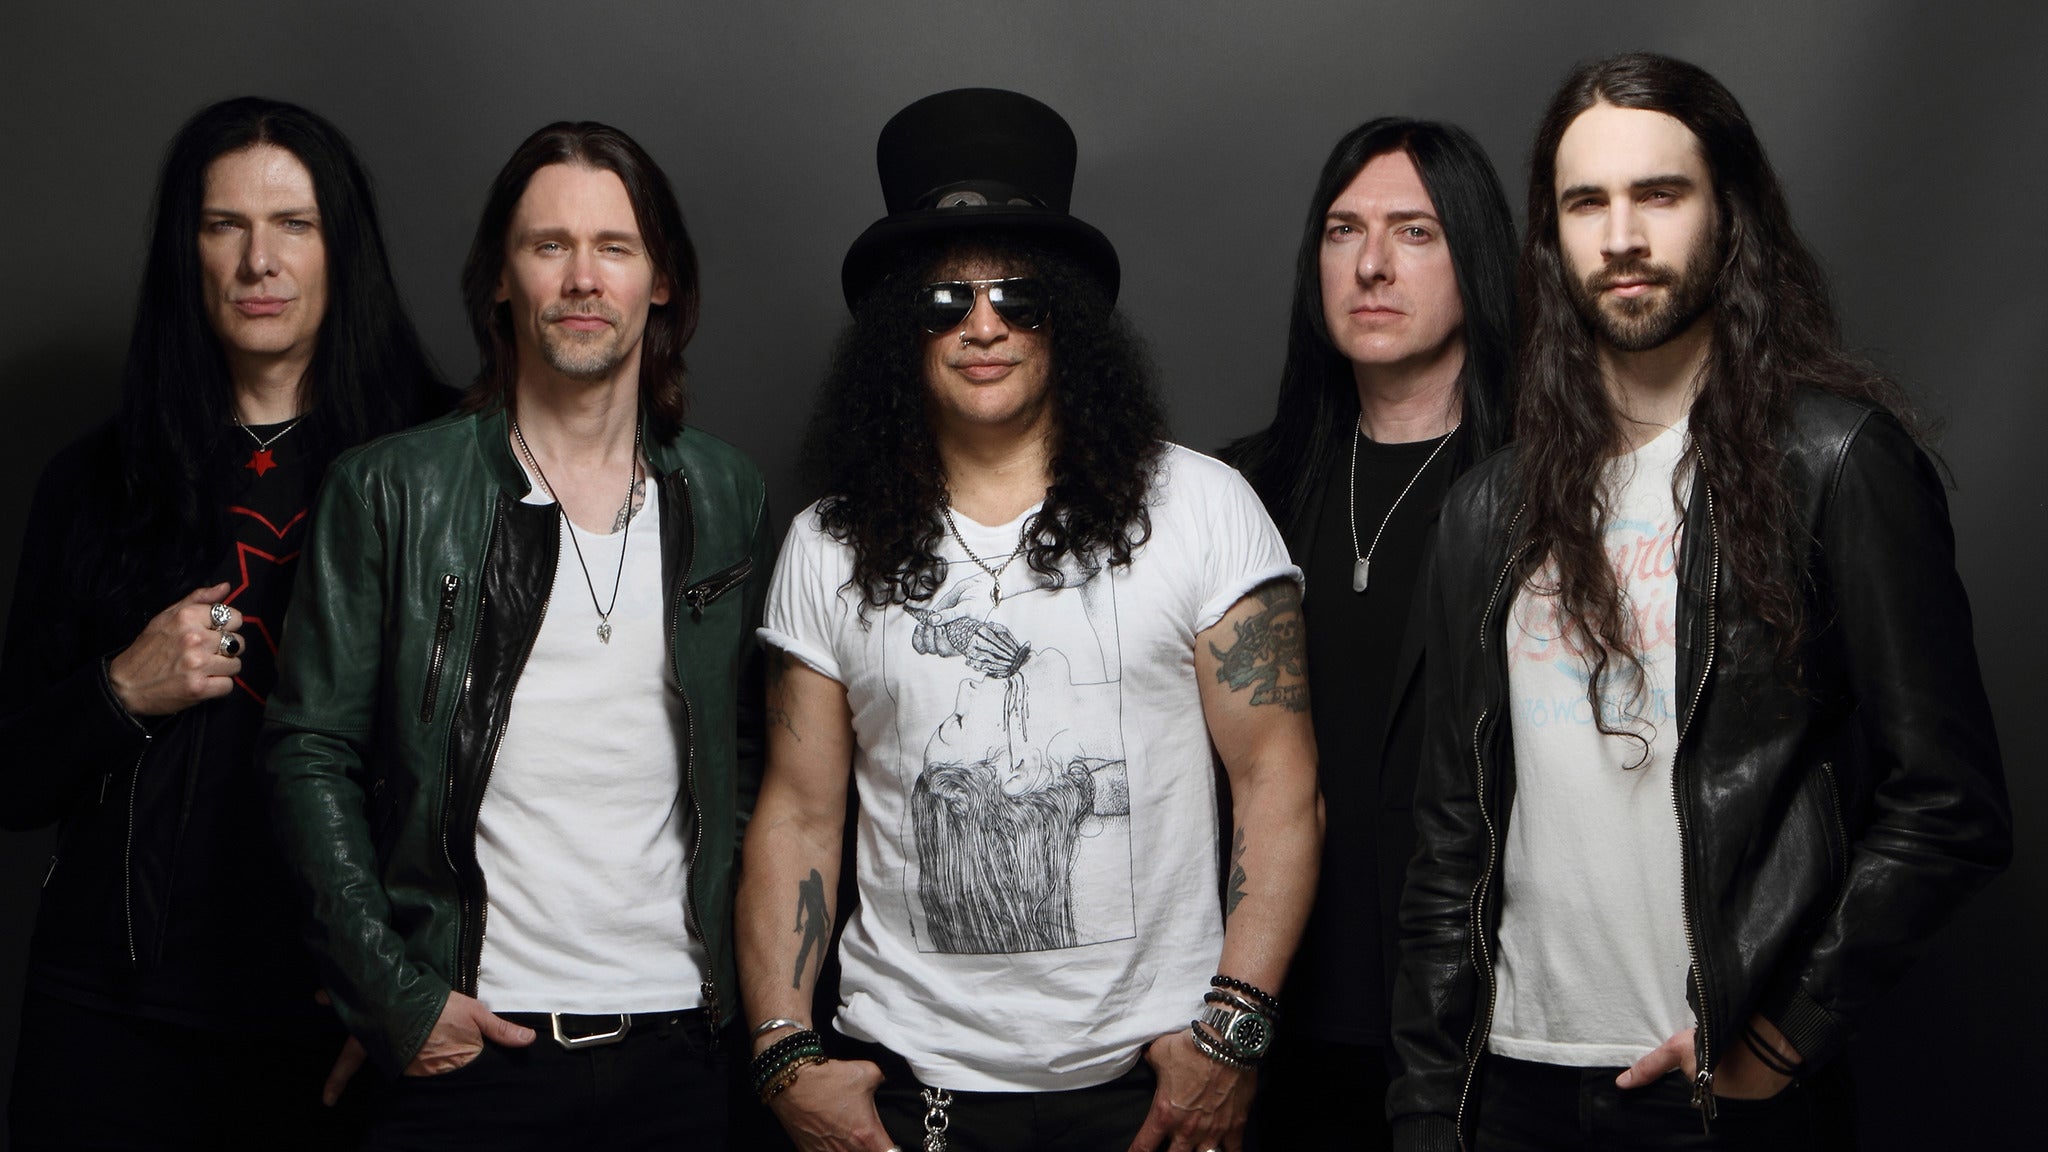 Slash ft. Myles Kennedy & The Conspirators - Living The Dream Tour '19 in Orlando promo photo for Ticketmaster presale offer code